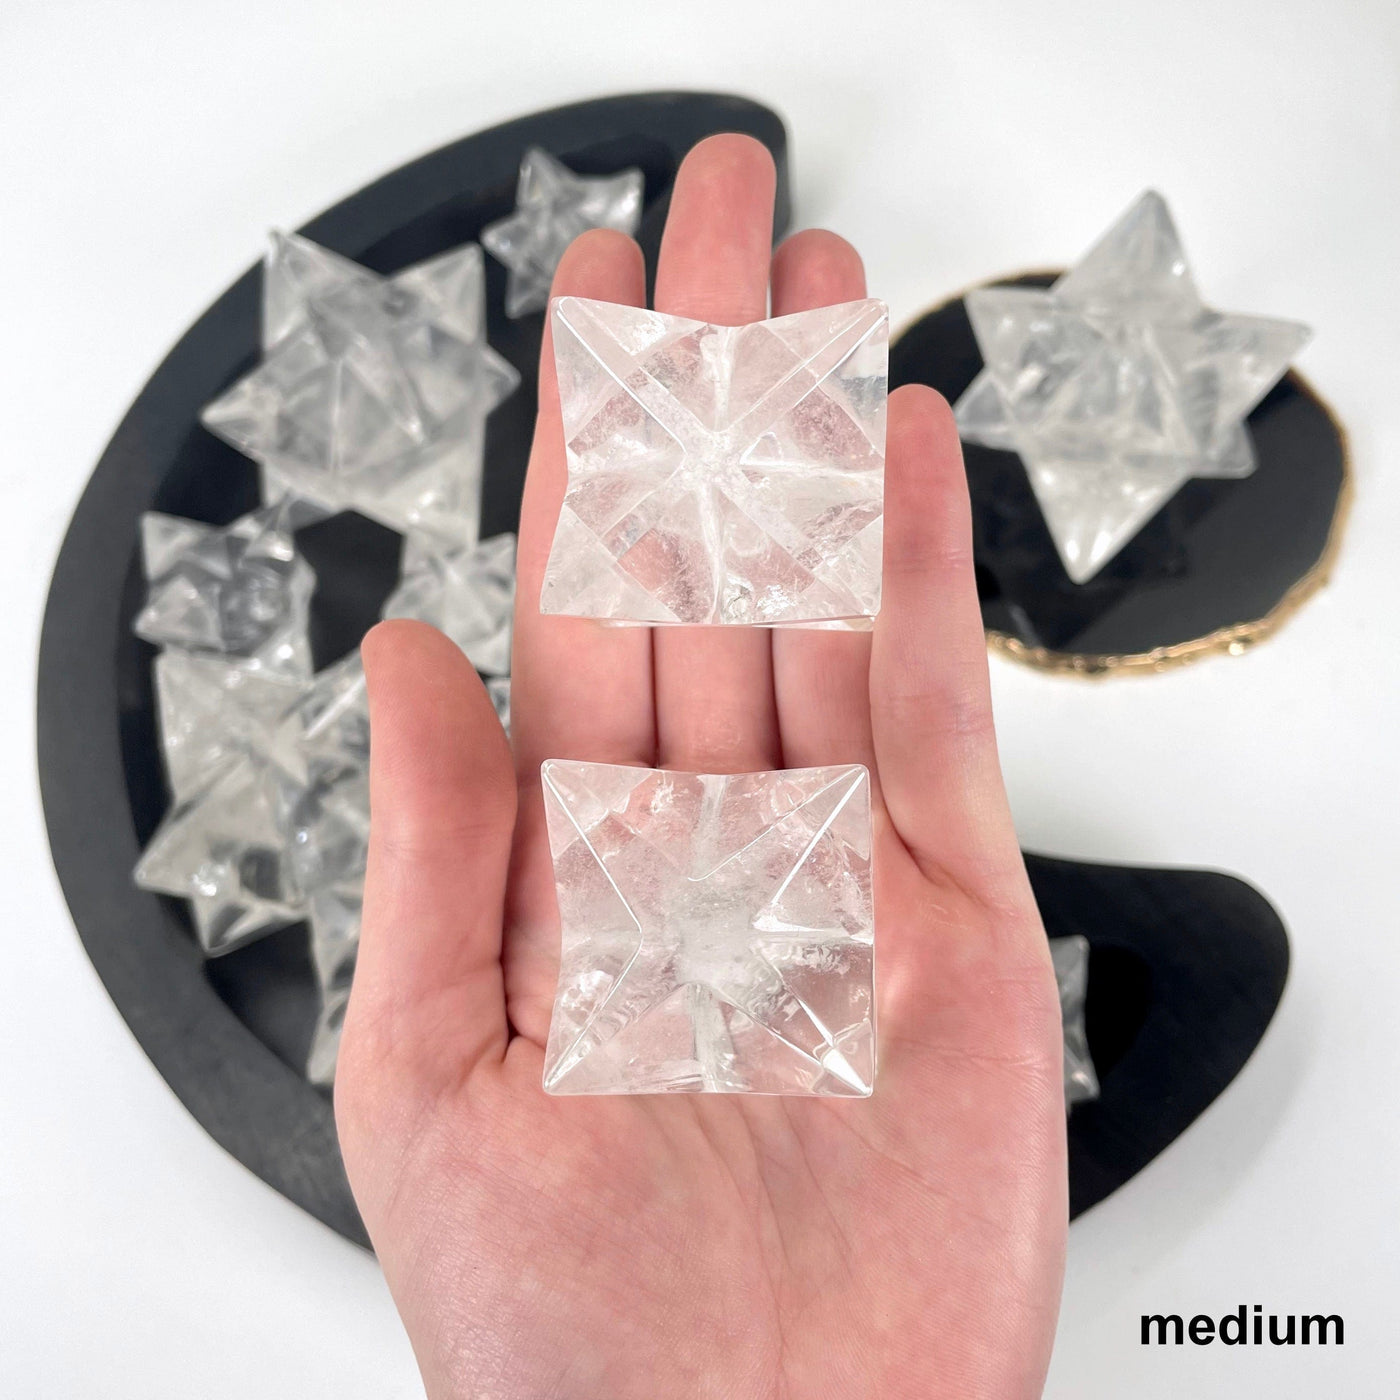 two medium crystal quartz merkabah stars in hand for size reference and possible variations with others in background display